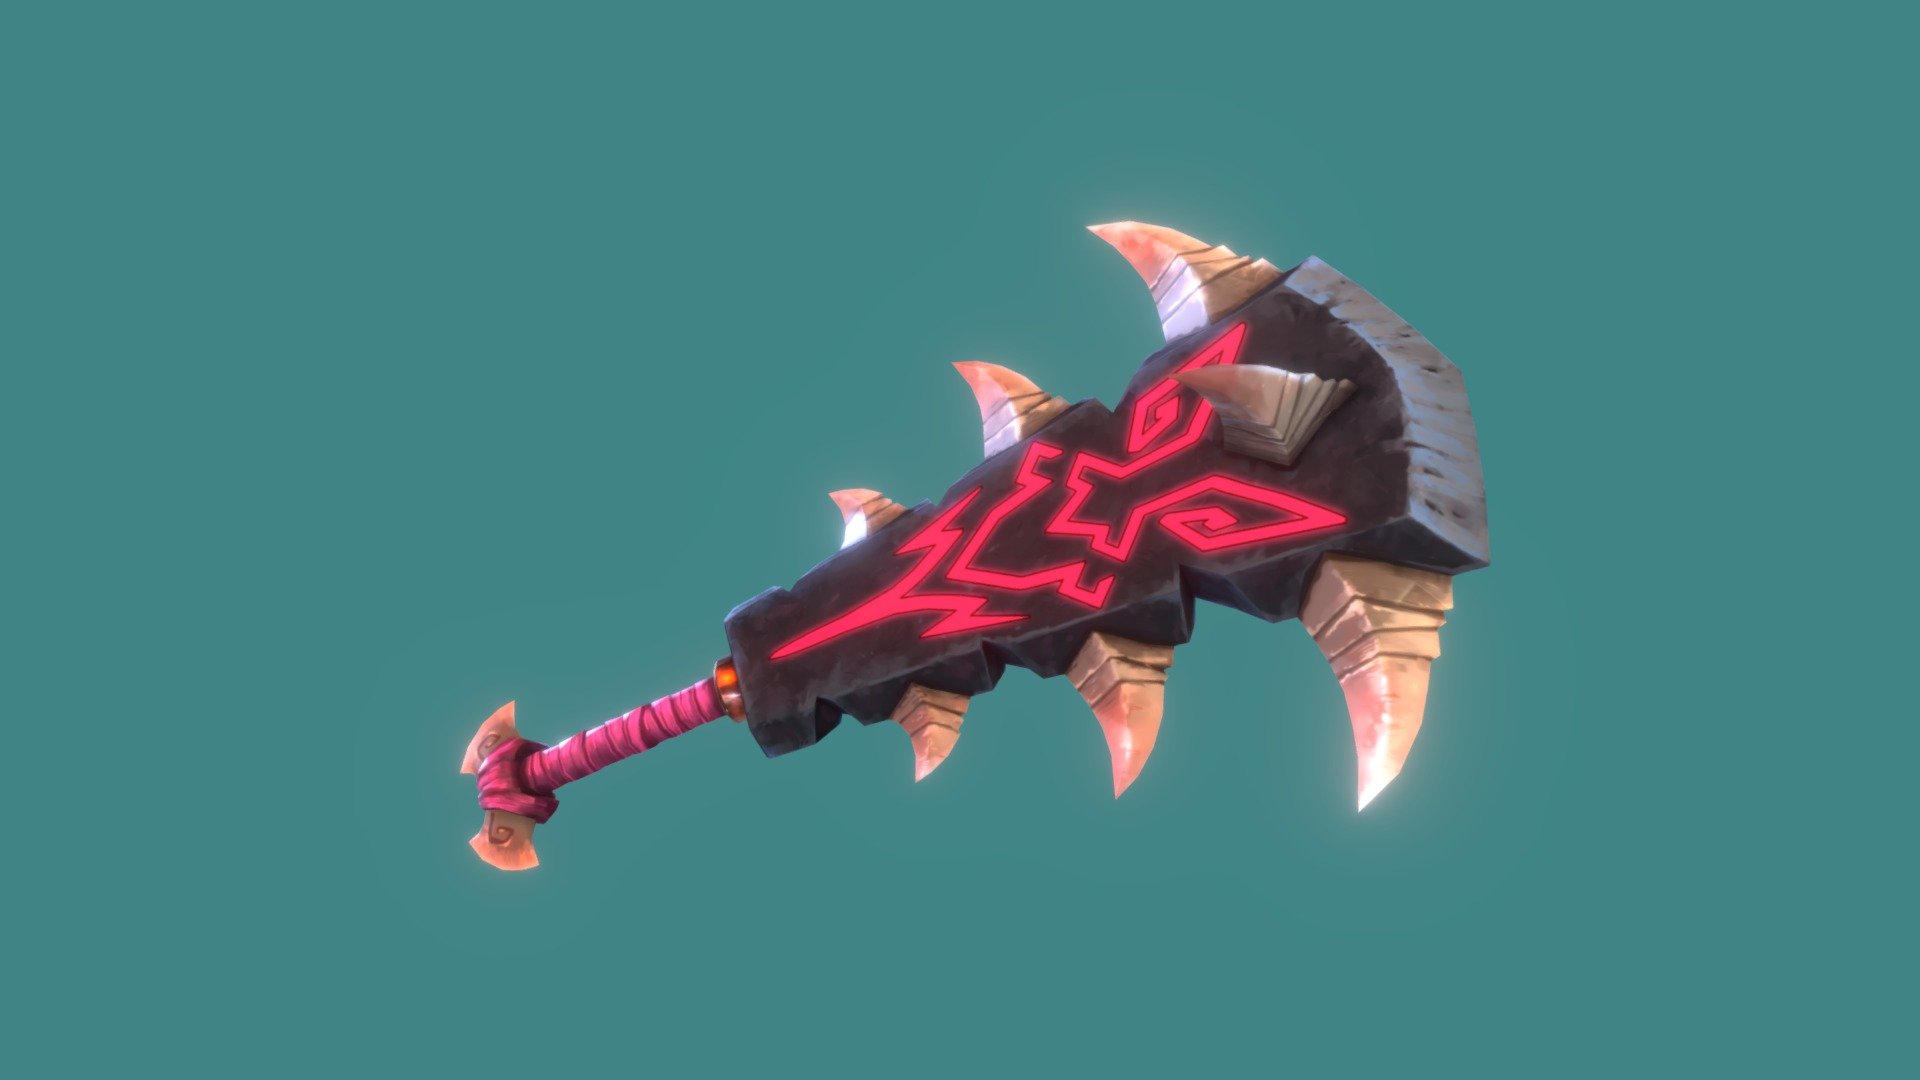 Stylized texture Axe
https://www.facebook.com/PIXIBOXLab

Tutorial free on

https://www.youtube.com/watch?v=p42oWbfK7WI - Axe Texture - Download Free 3D model by PIXIBOX 3d model